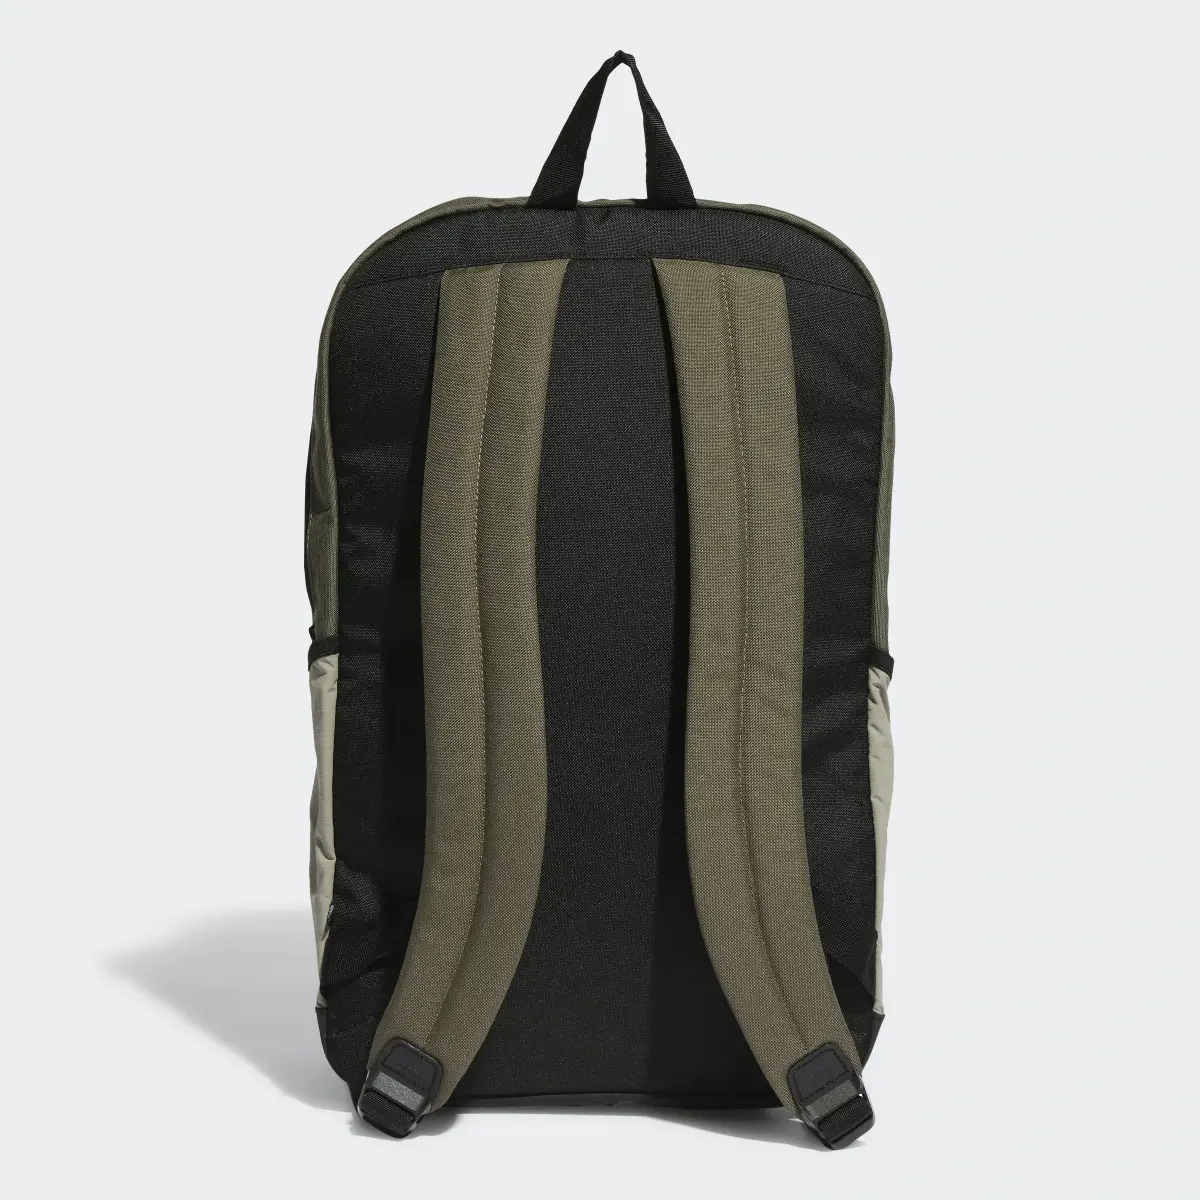 Adidas Motion Material Backpack. 3